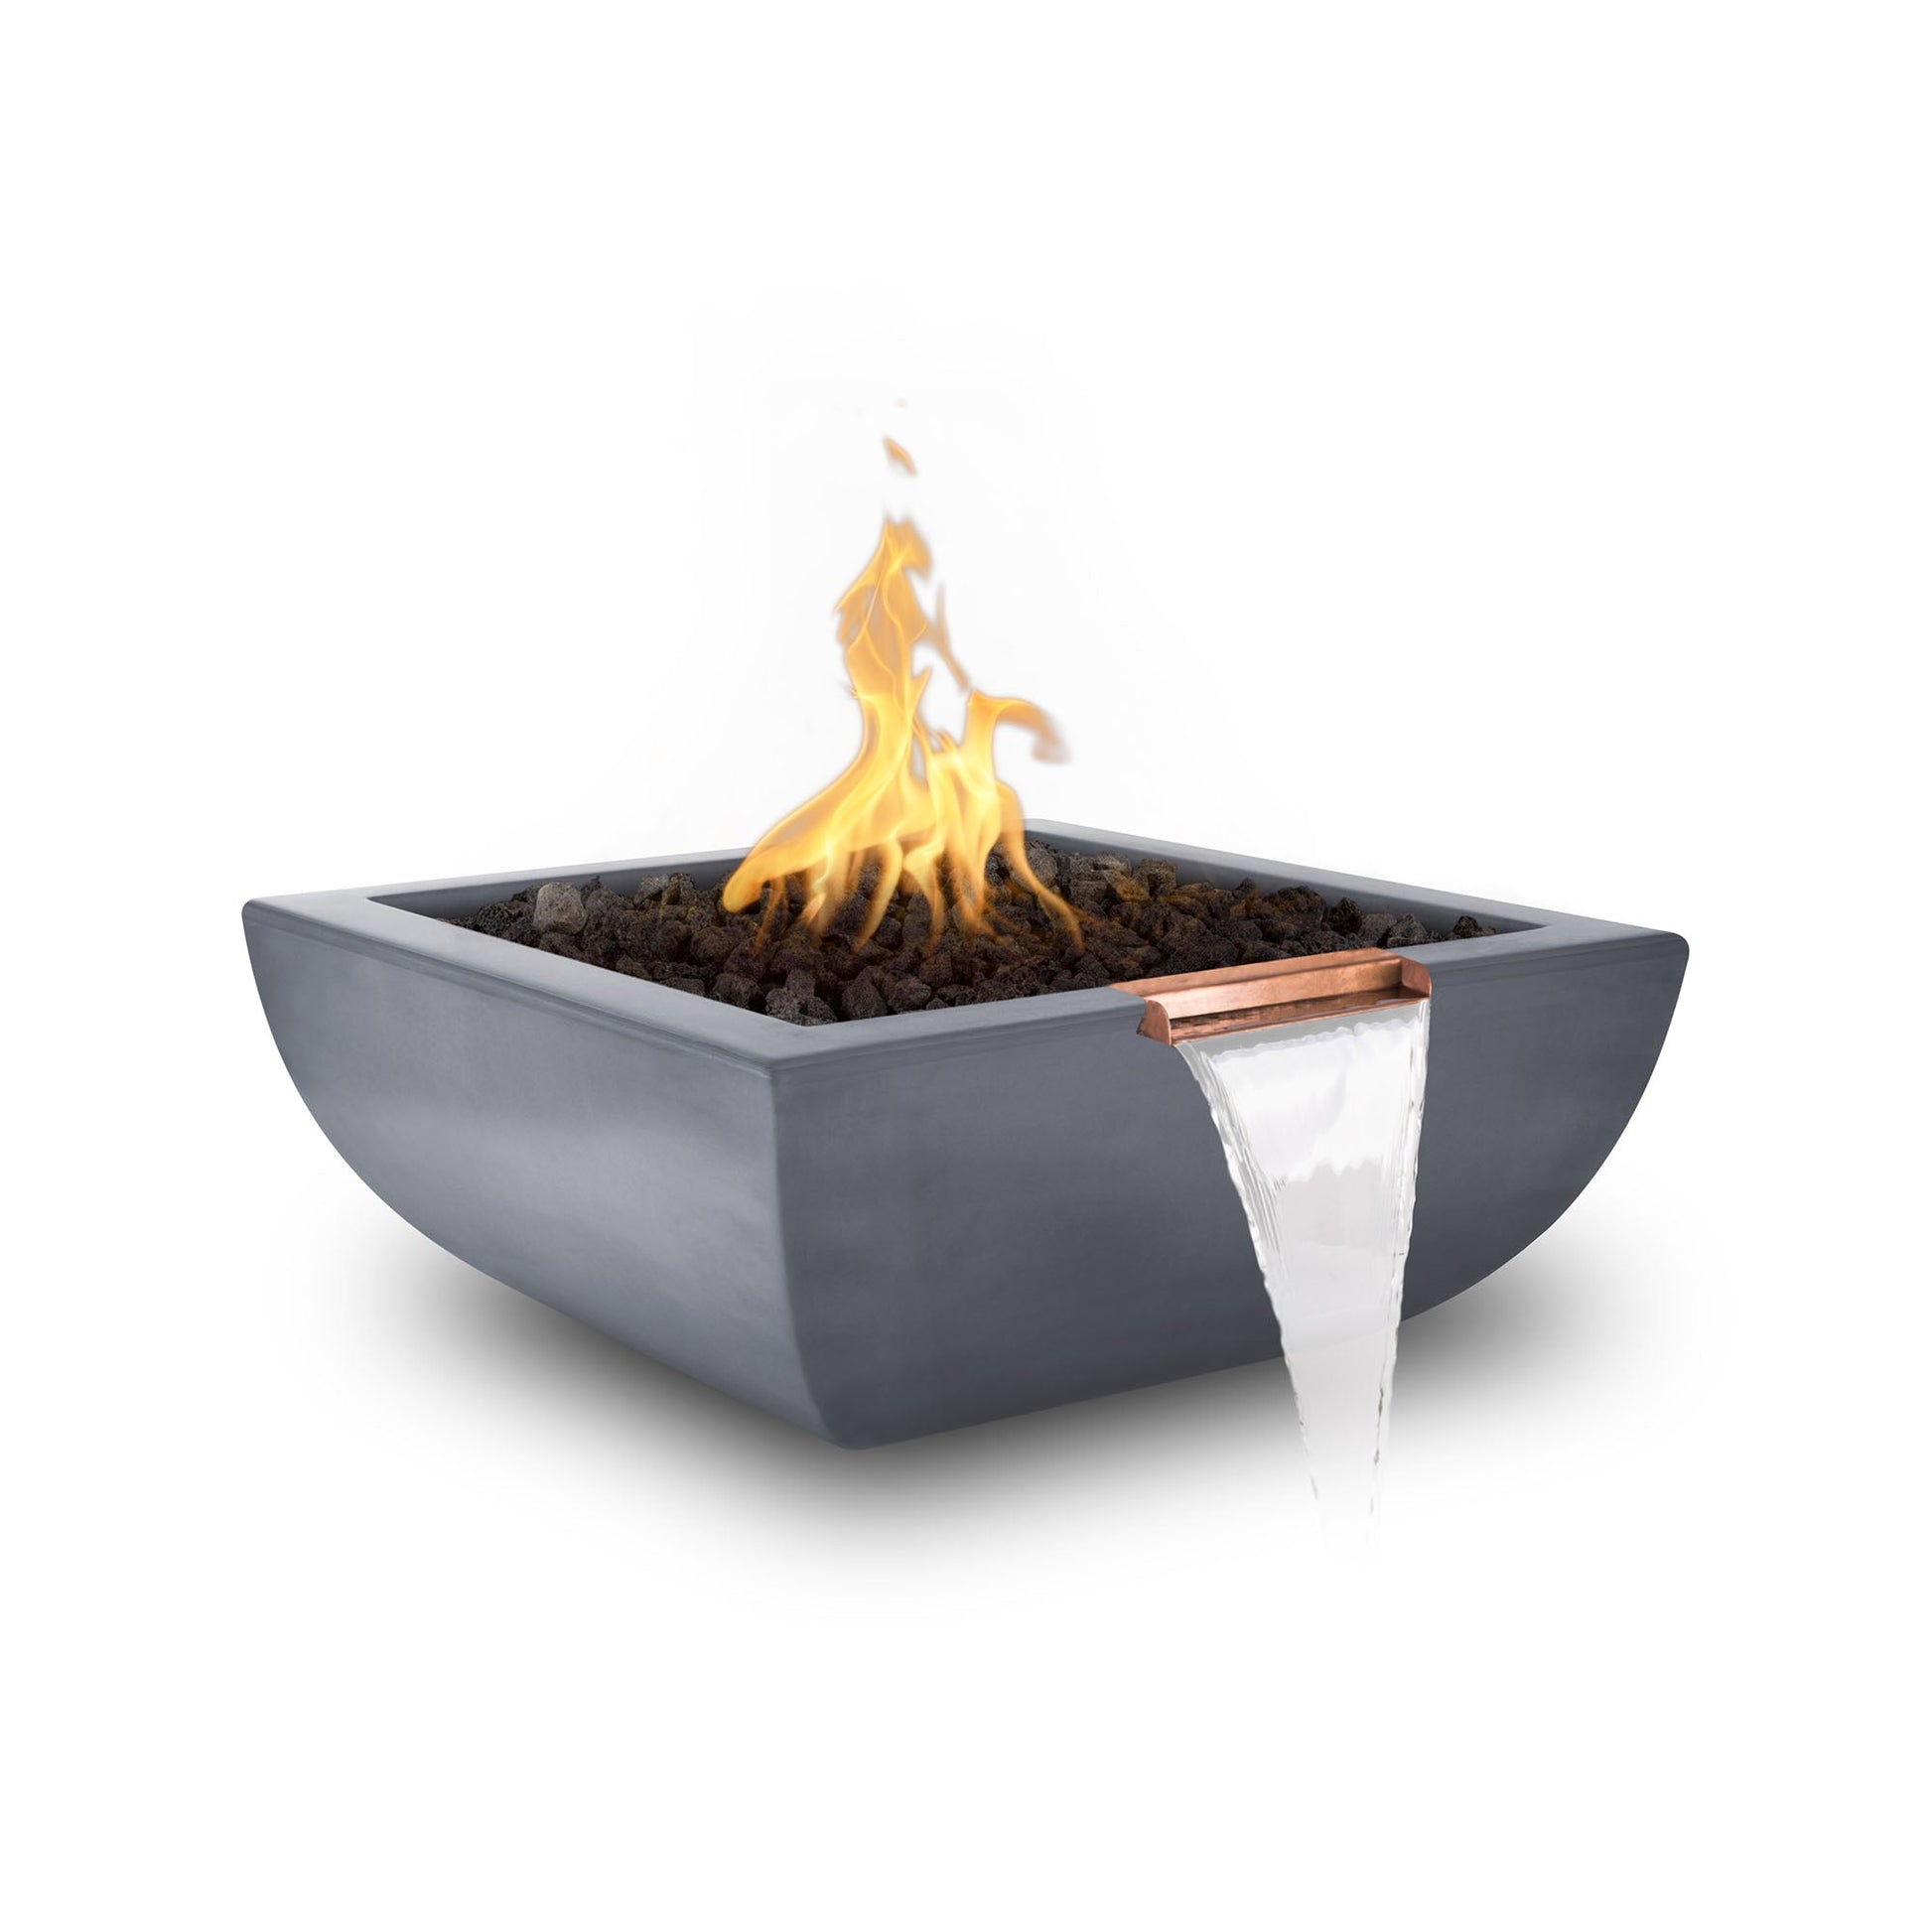 The Outdoor Plus Square Avalon 24" White GFRC Concrete Liquid Propane Fire & Water Bowl with Match Lit with Flame Sense Ignition